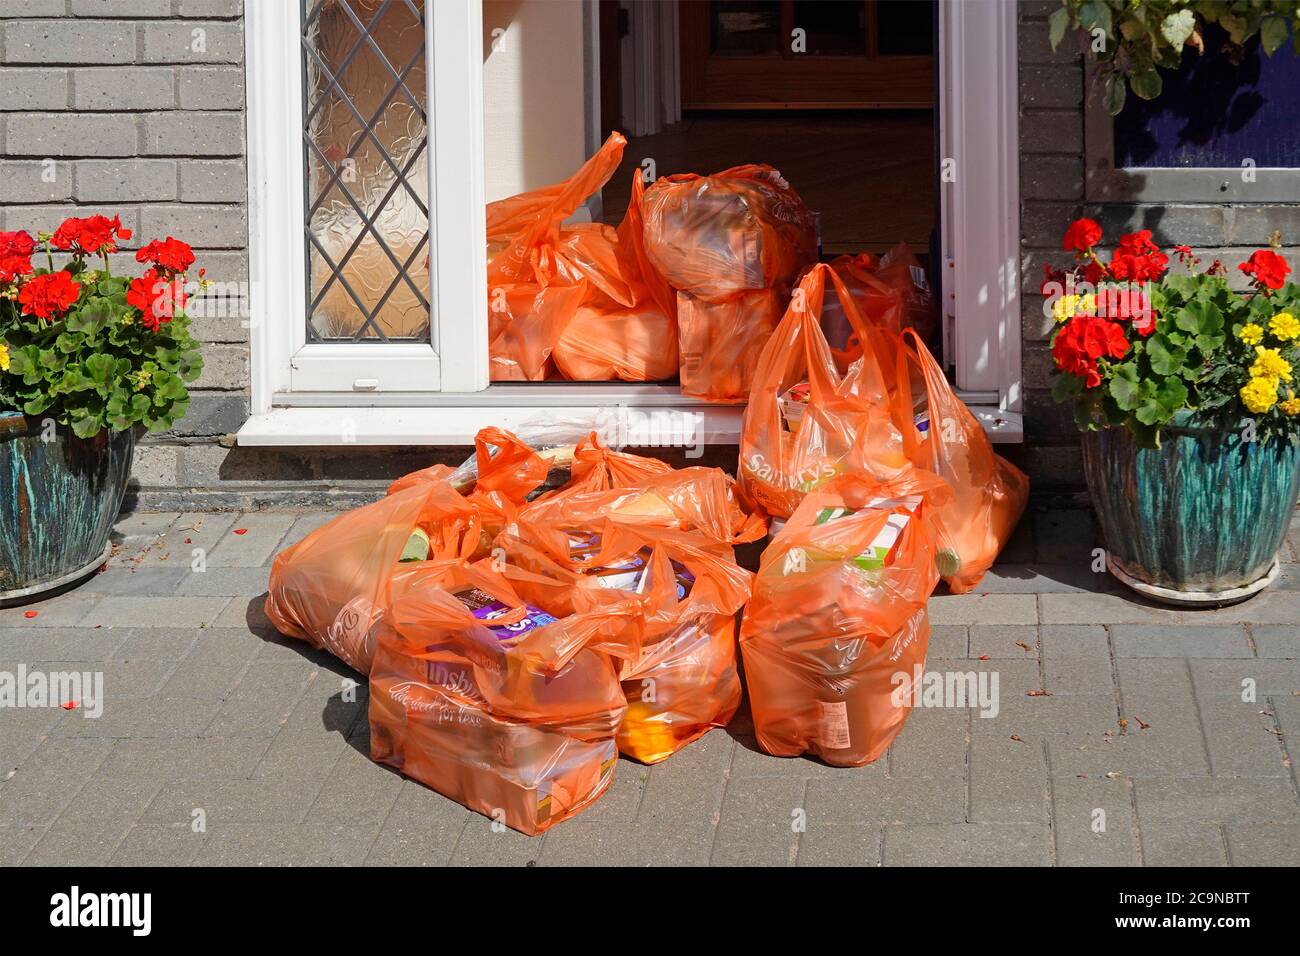 Sainsburys Covid 19 grocery food shopping bag left by delivery van driver bags moved later by customer into house & maintains social distance rules UK Stock Photo